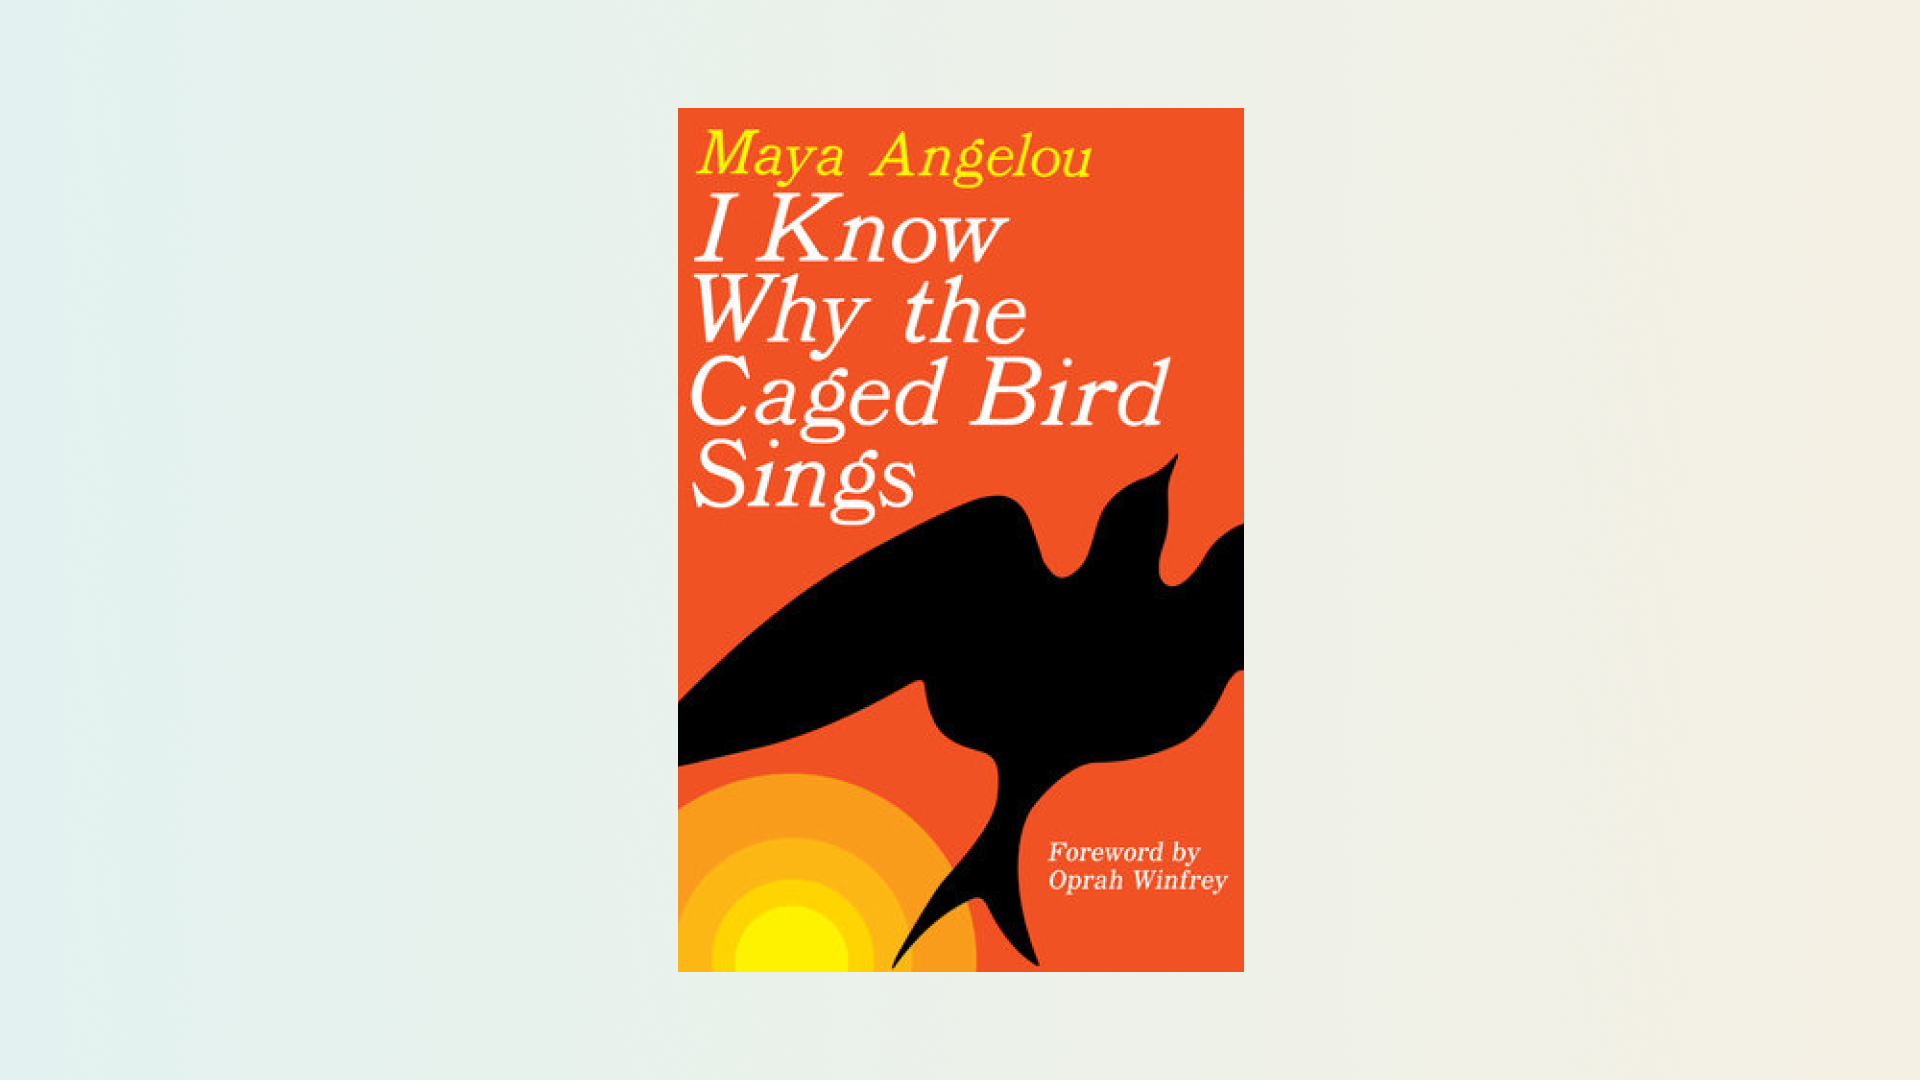 “I Know Why the Caged Bird Sings” by Maya Angelou